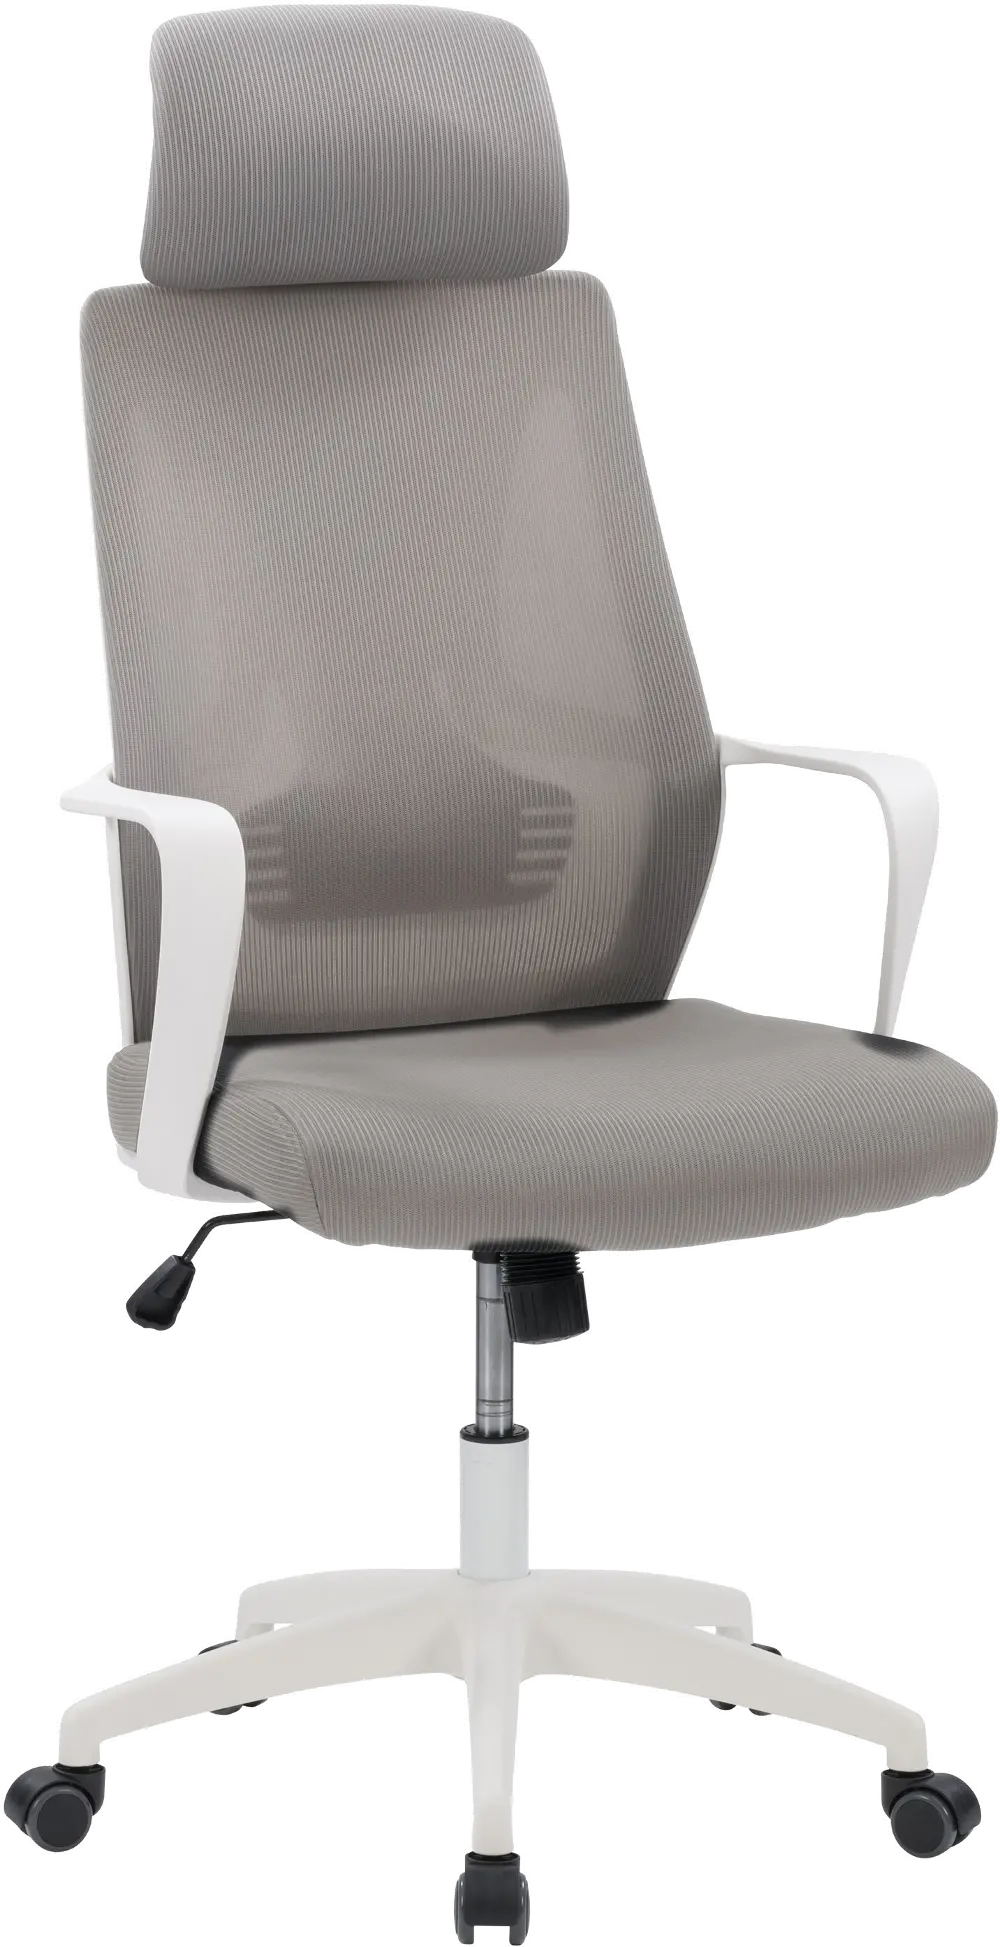 Workspace Gray and White Mesh Office Chair-1